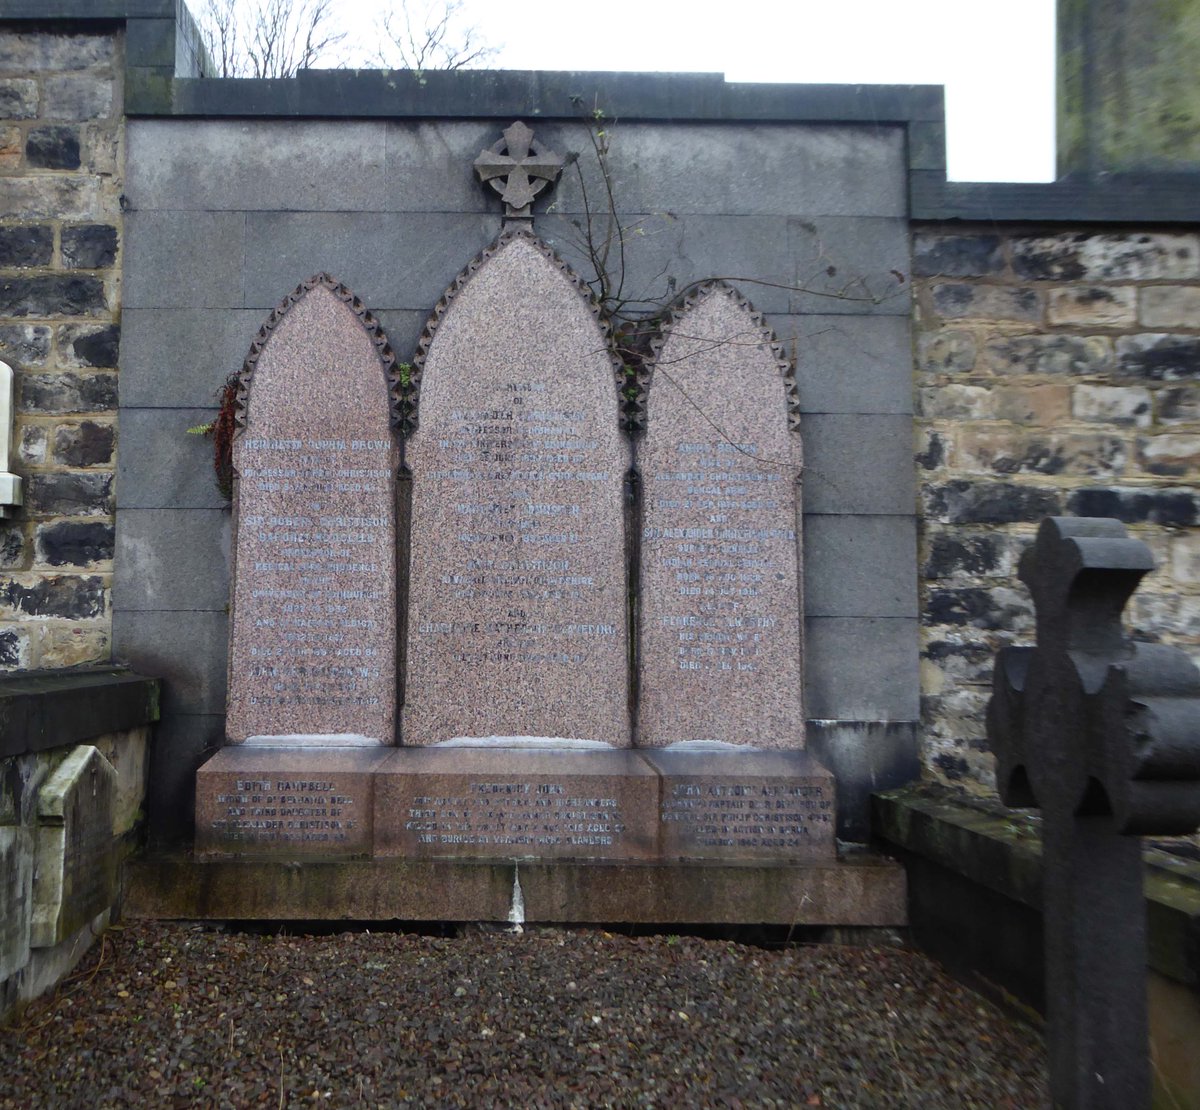 Same site mentions New Calton CemeteryEdinburgh, City of Edinburgh, Scotland as the family plot and a search using this info comes up with a picture of the family grave containing the original marker stone. Close enough to me for a visit in the future!